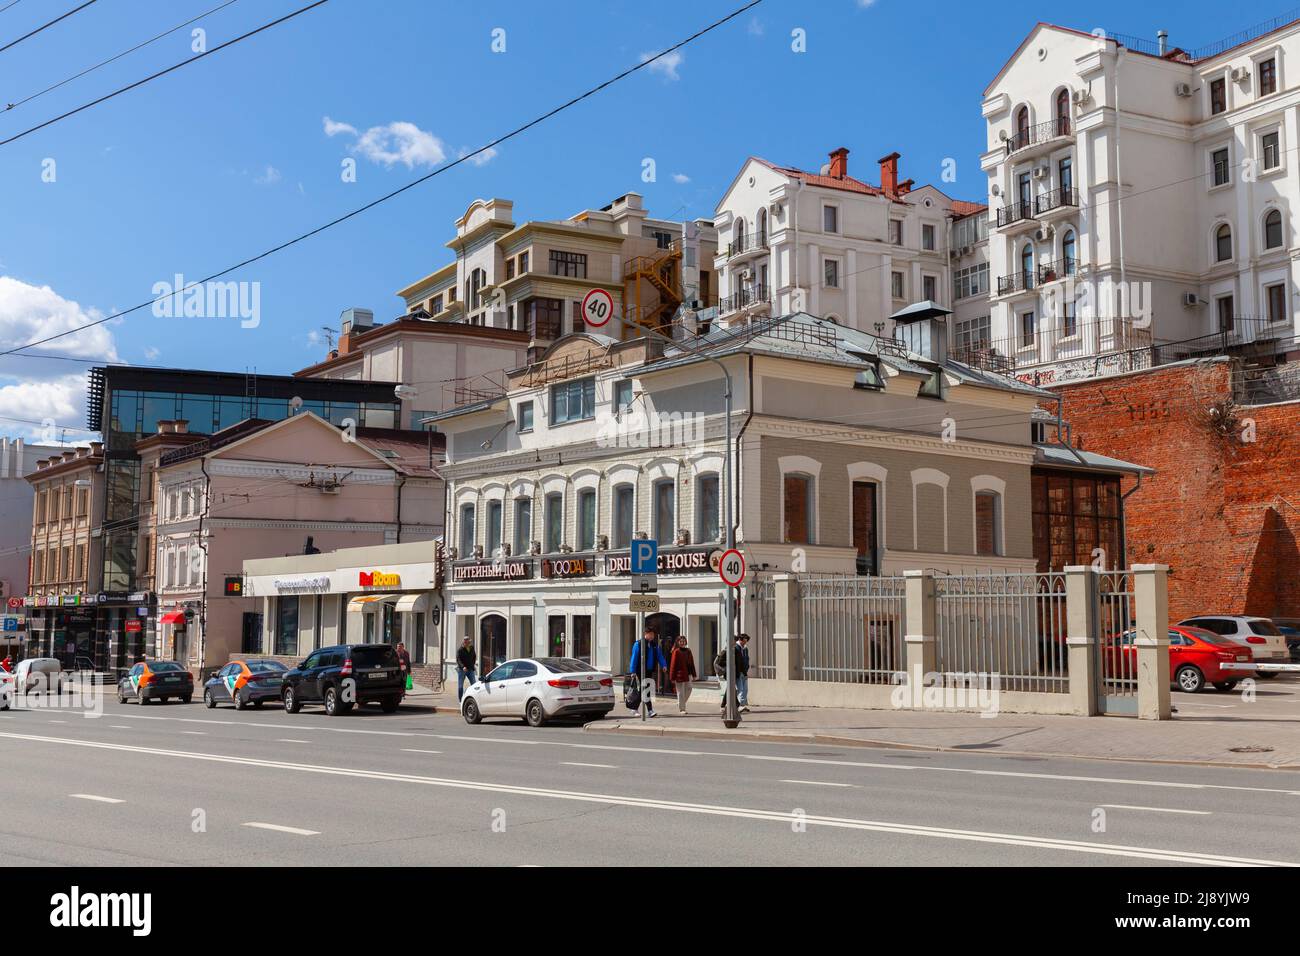 Kazan, Russia - May 5, 2022: Kazan street view with residential houses along Pushkin Street, it is the main street of Kazan, the capital of the Republ Stock Photo